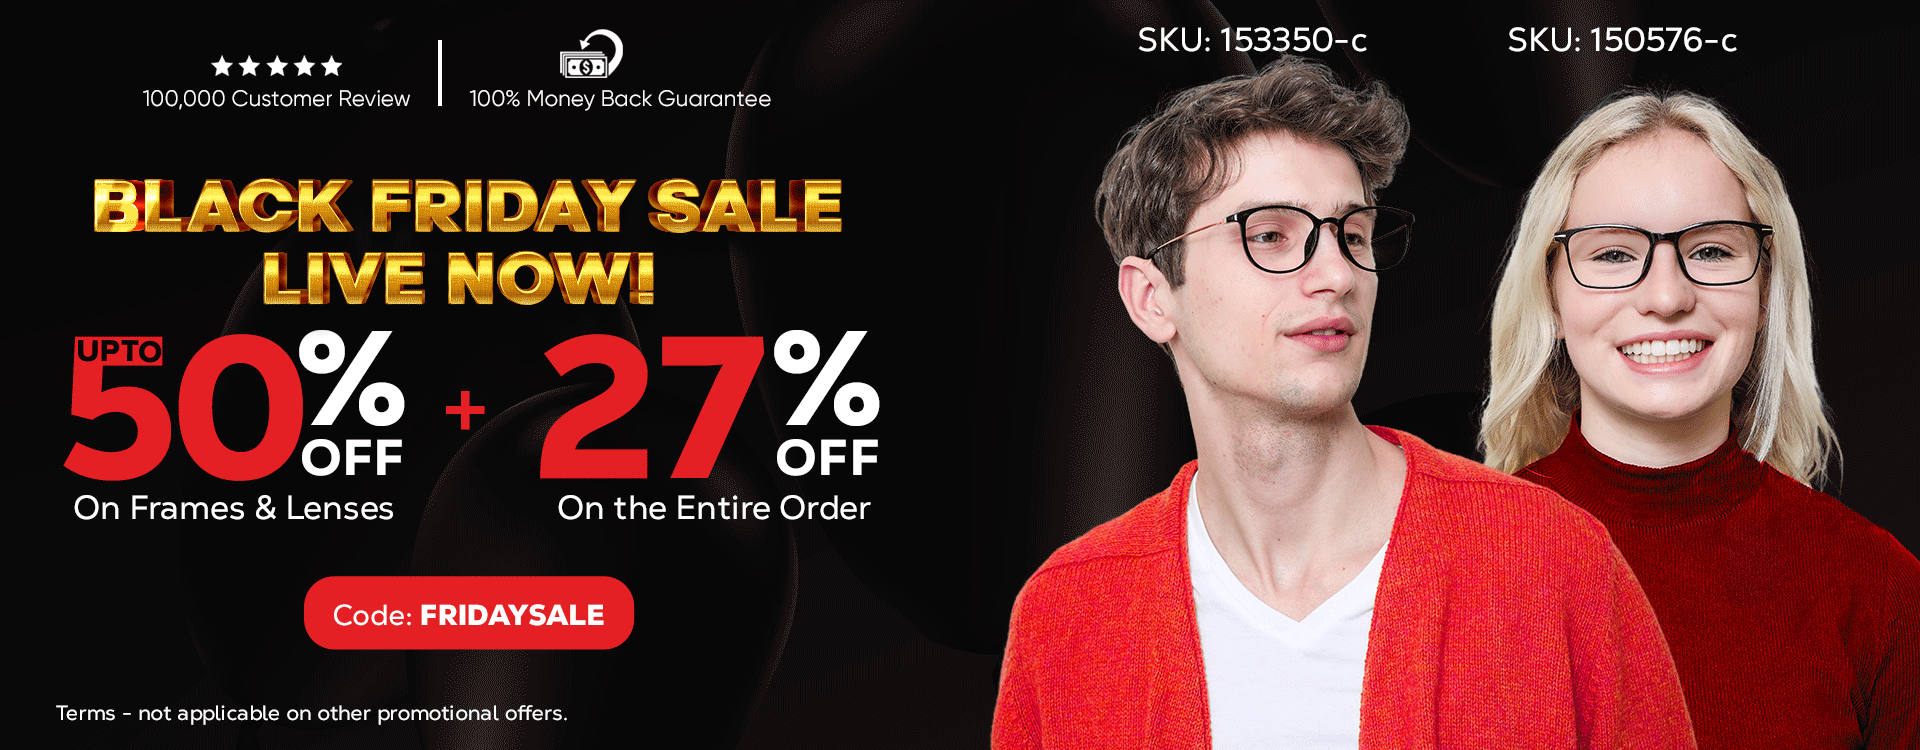 Upto 50% Discount On Frames & Lenses Extra 27% OFF On The Entire Order CODE: FRIDAYSALE